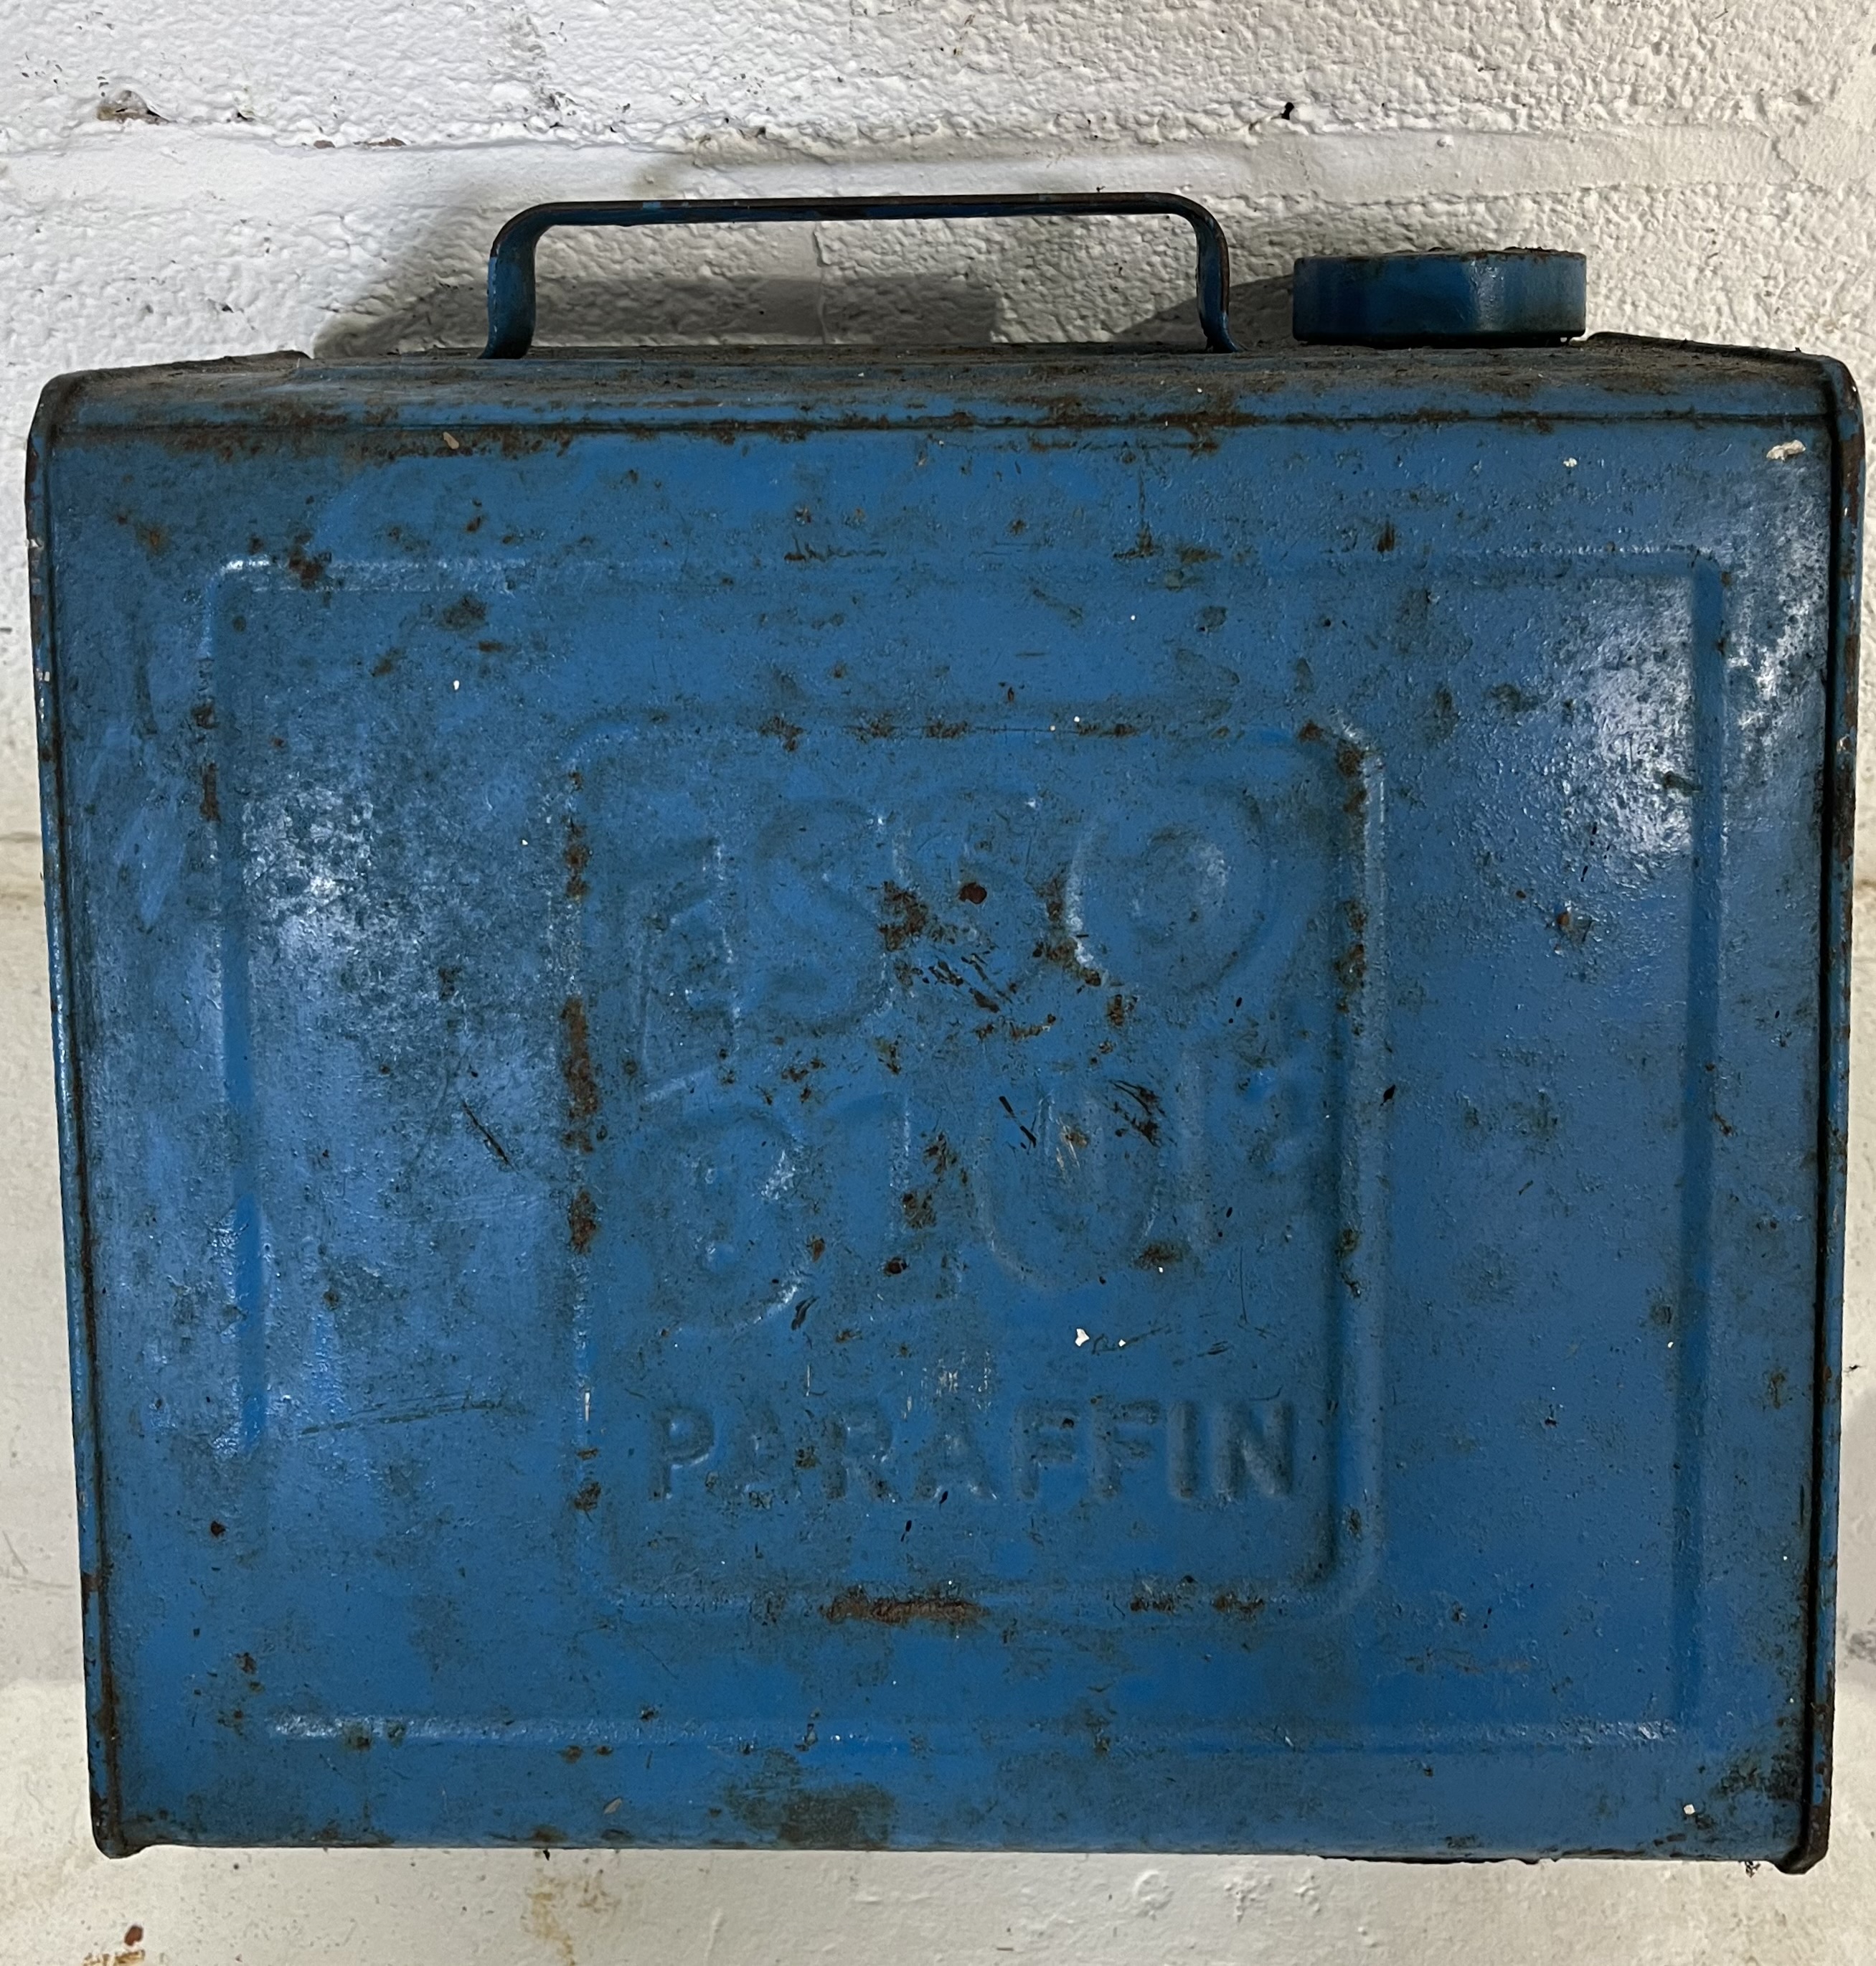 A collection of oil cans including B.P. Shellmex and Esso Blue Paraffin - Image 3 of 9